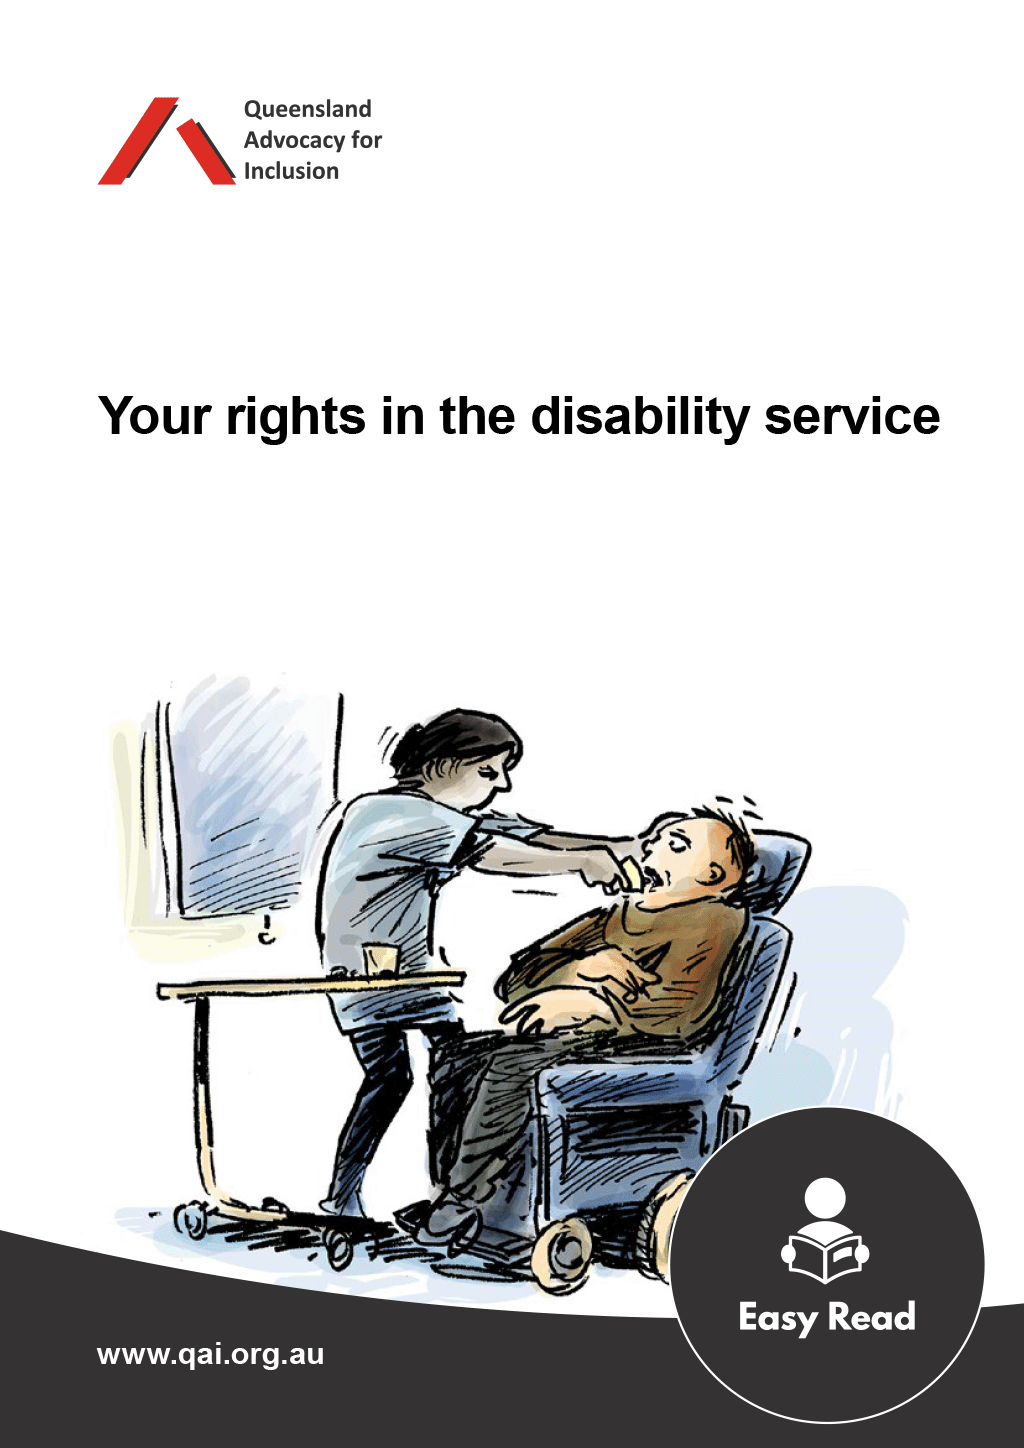 Checklist cover page with QAI logo, title "Your rights in the disability service" with an illustration of a man in a wheelchair and a support person shoving medication into his mouth. Easy Read icon in the bottom corner.